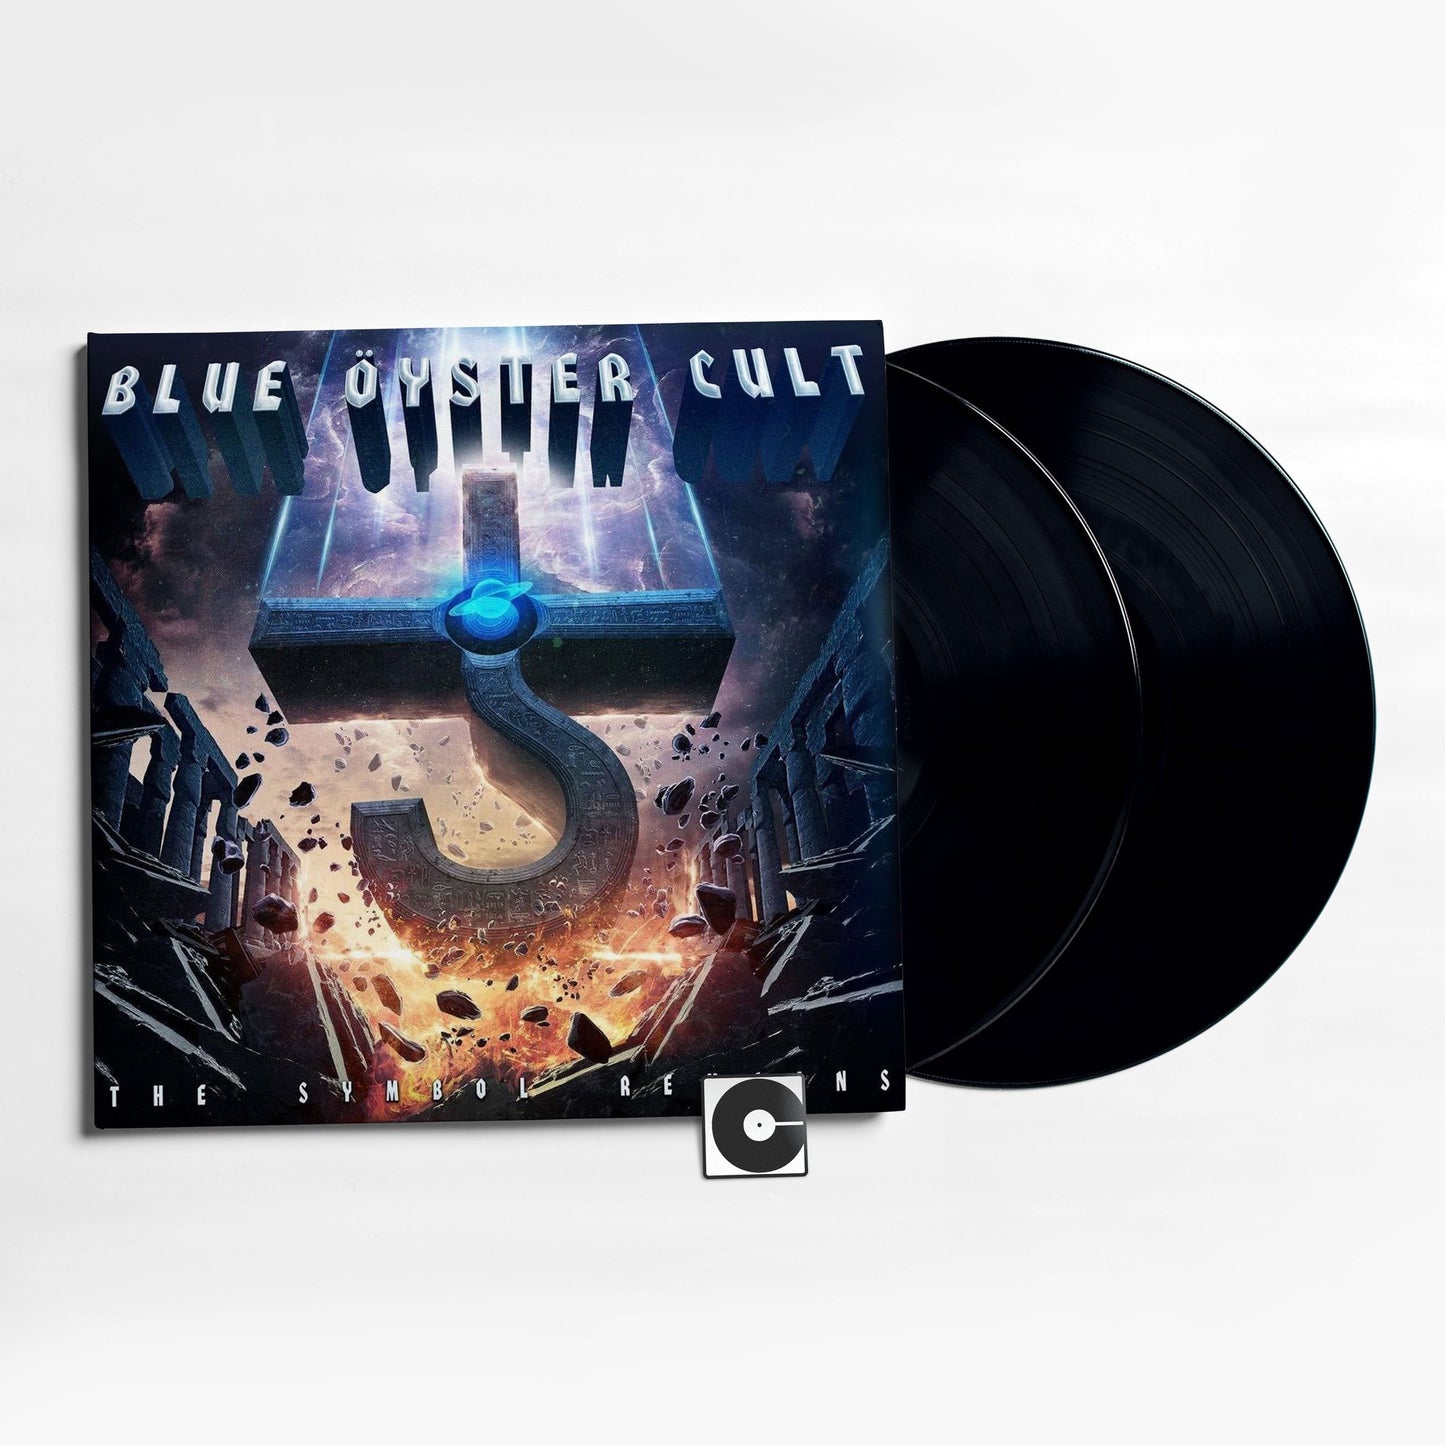 Blue Oyster Cult - "The Symbol Remains"